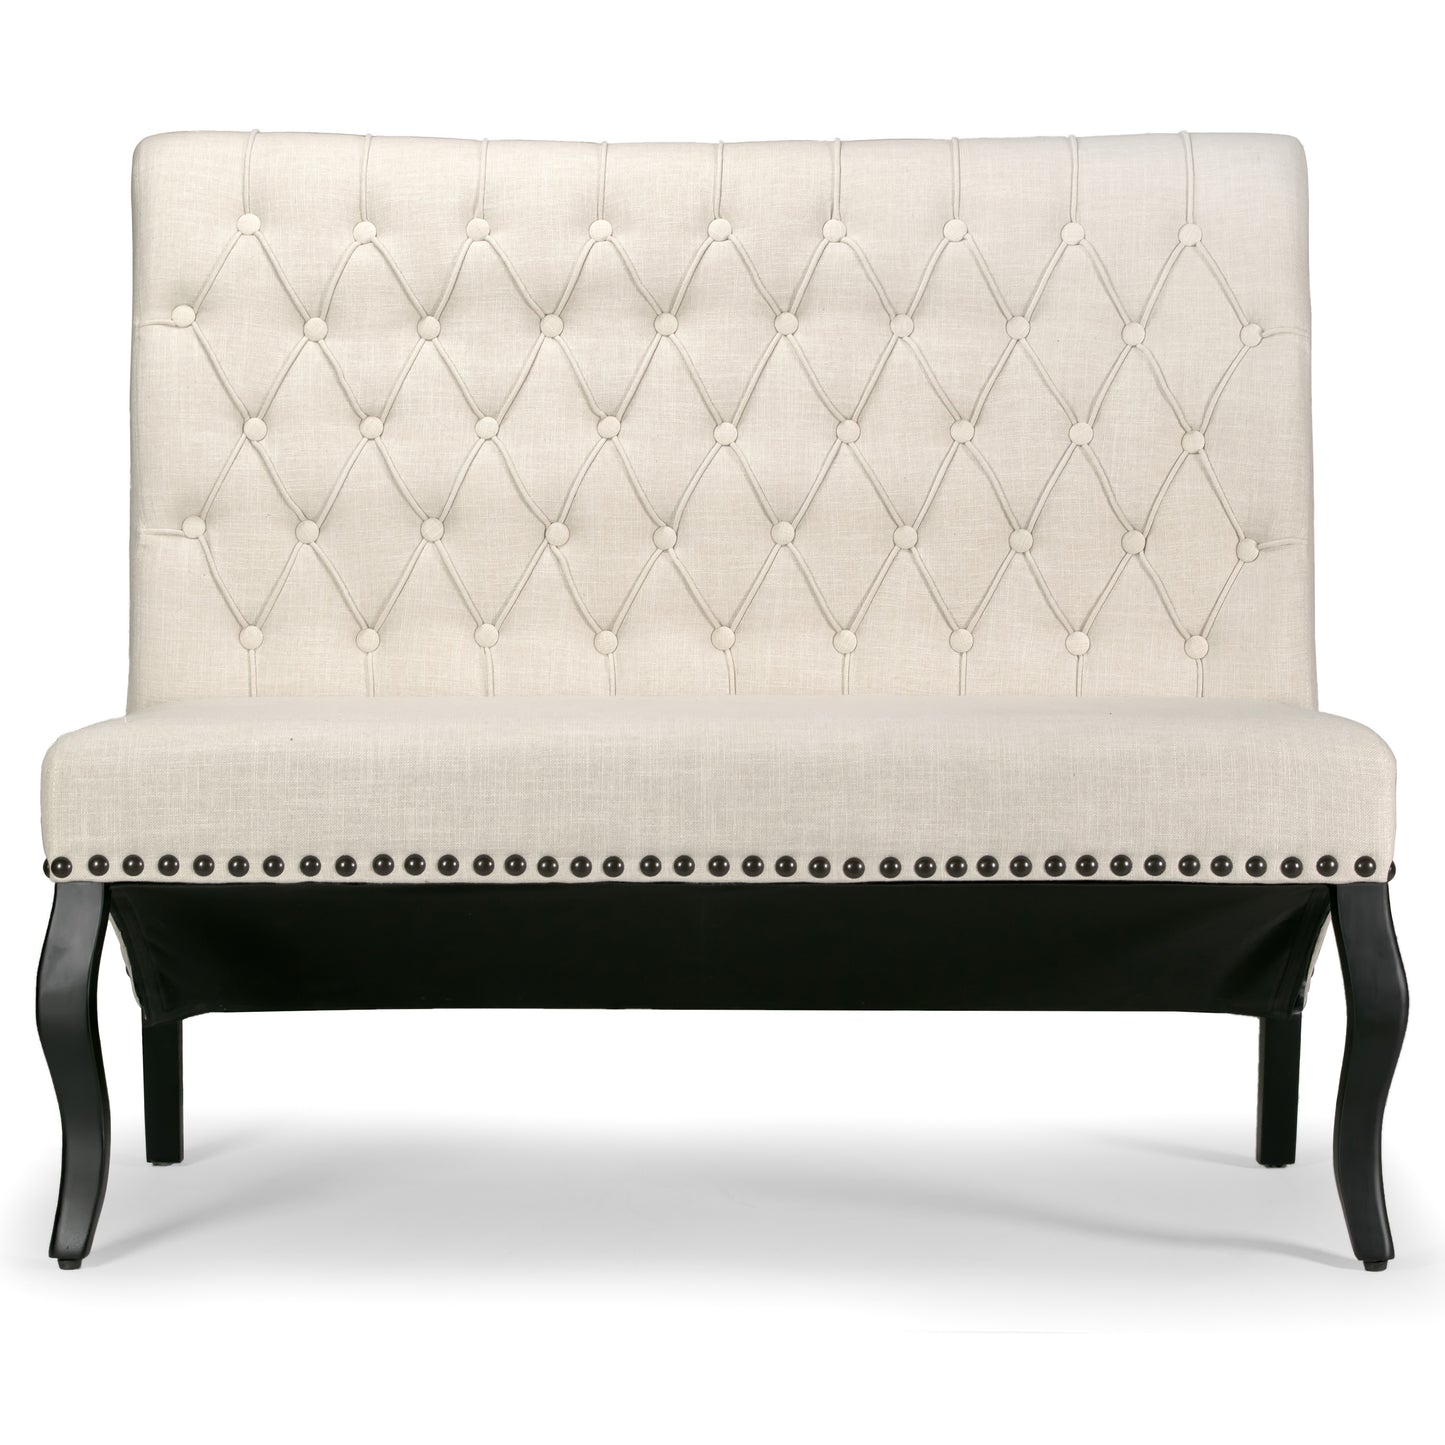 Alisa Beige Upholstered Settee Banquette Bench Loveseat with Button Tufting